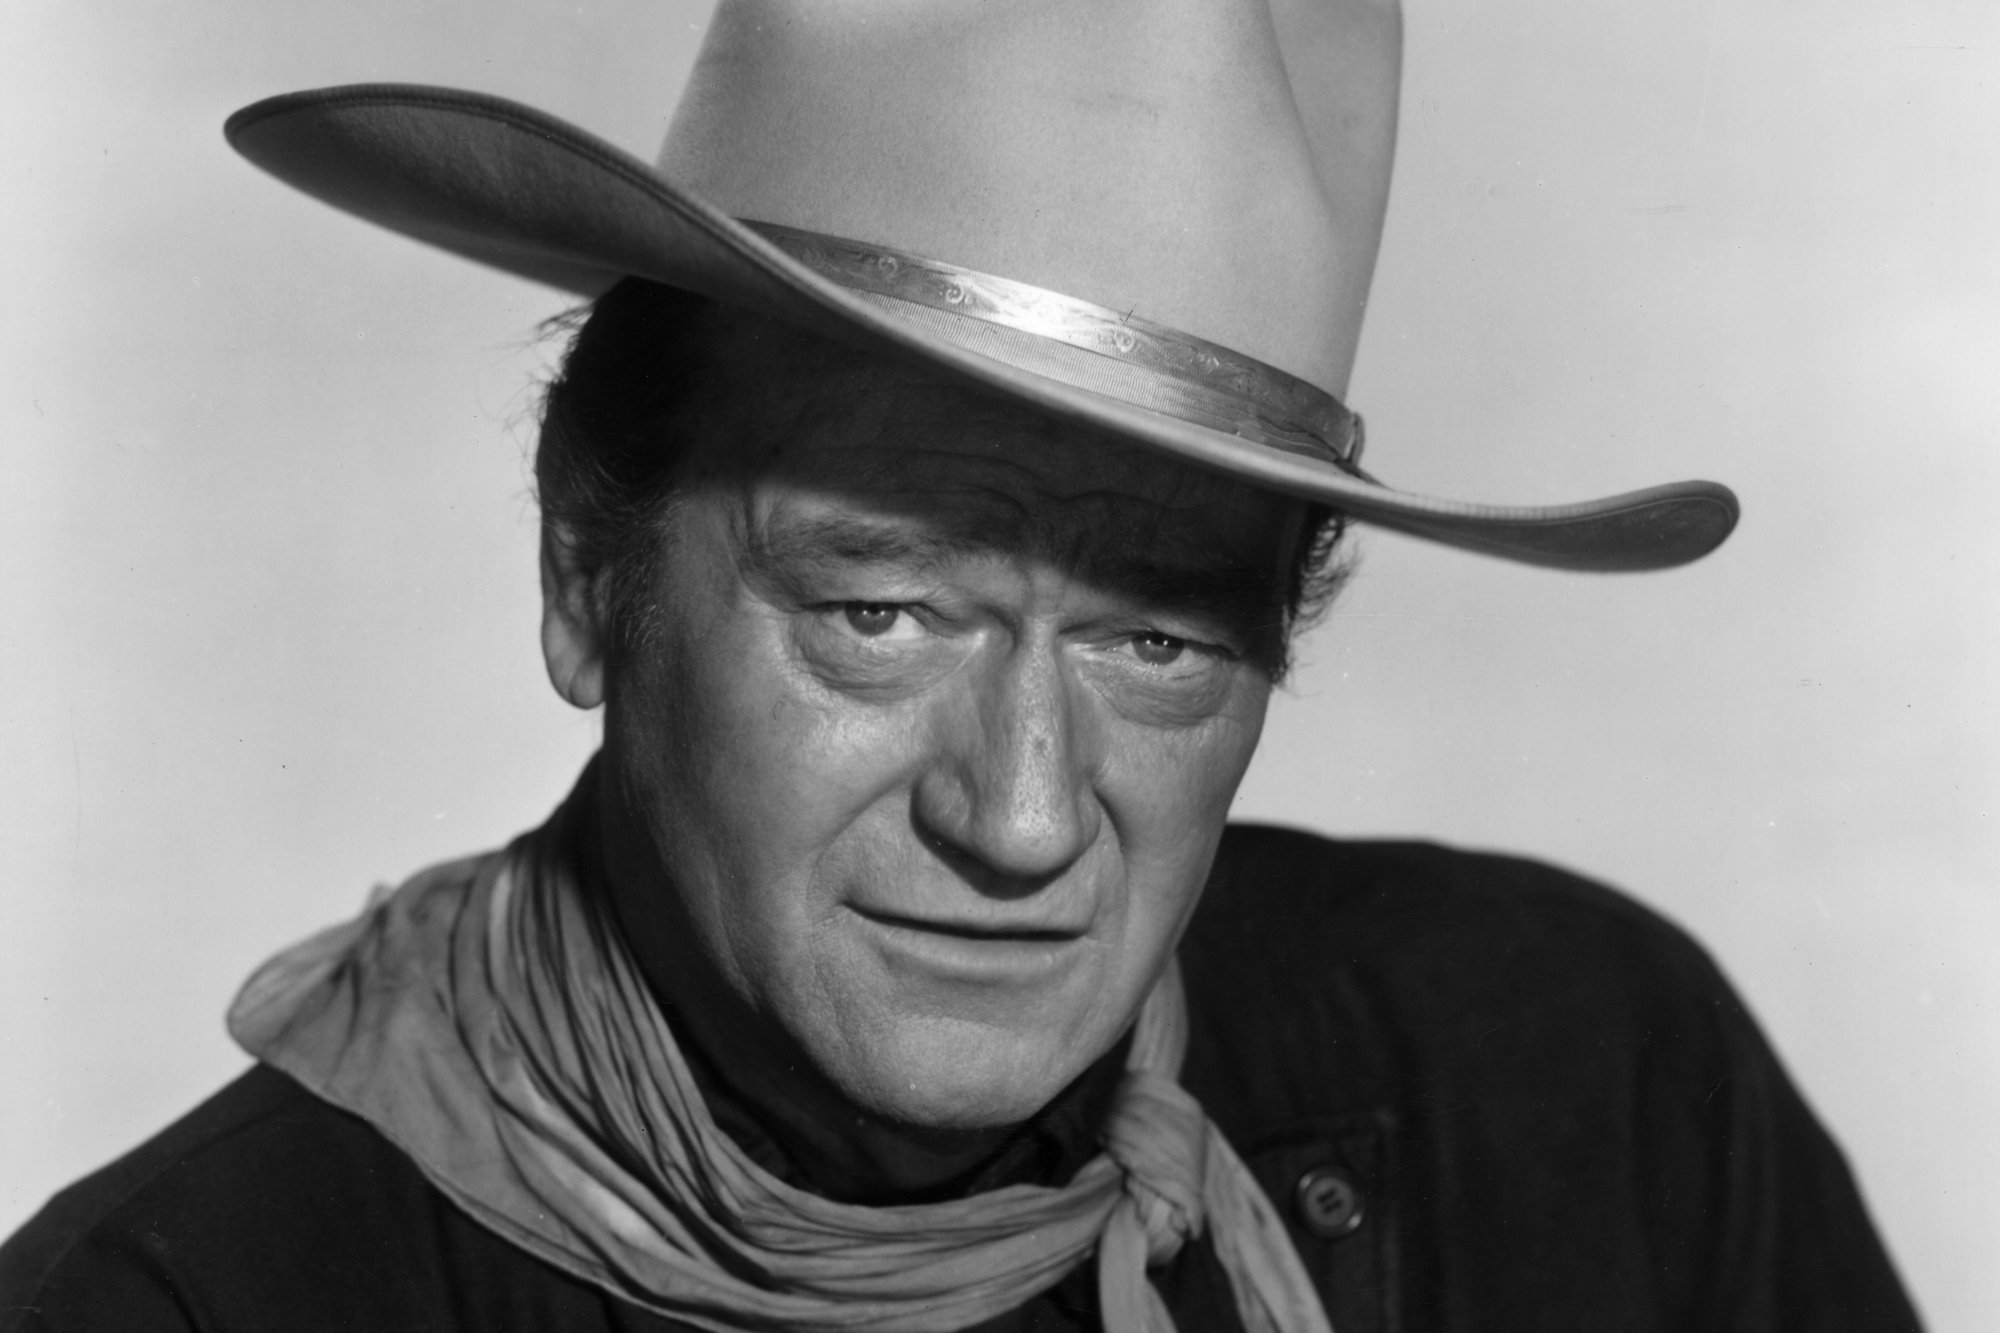 John Wayne, whose real name was Marion Michael Morrison, looking into the camera while wearing a cowboy hat